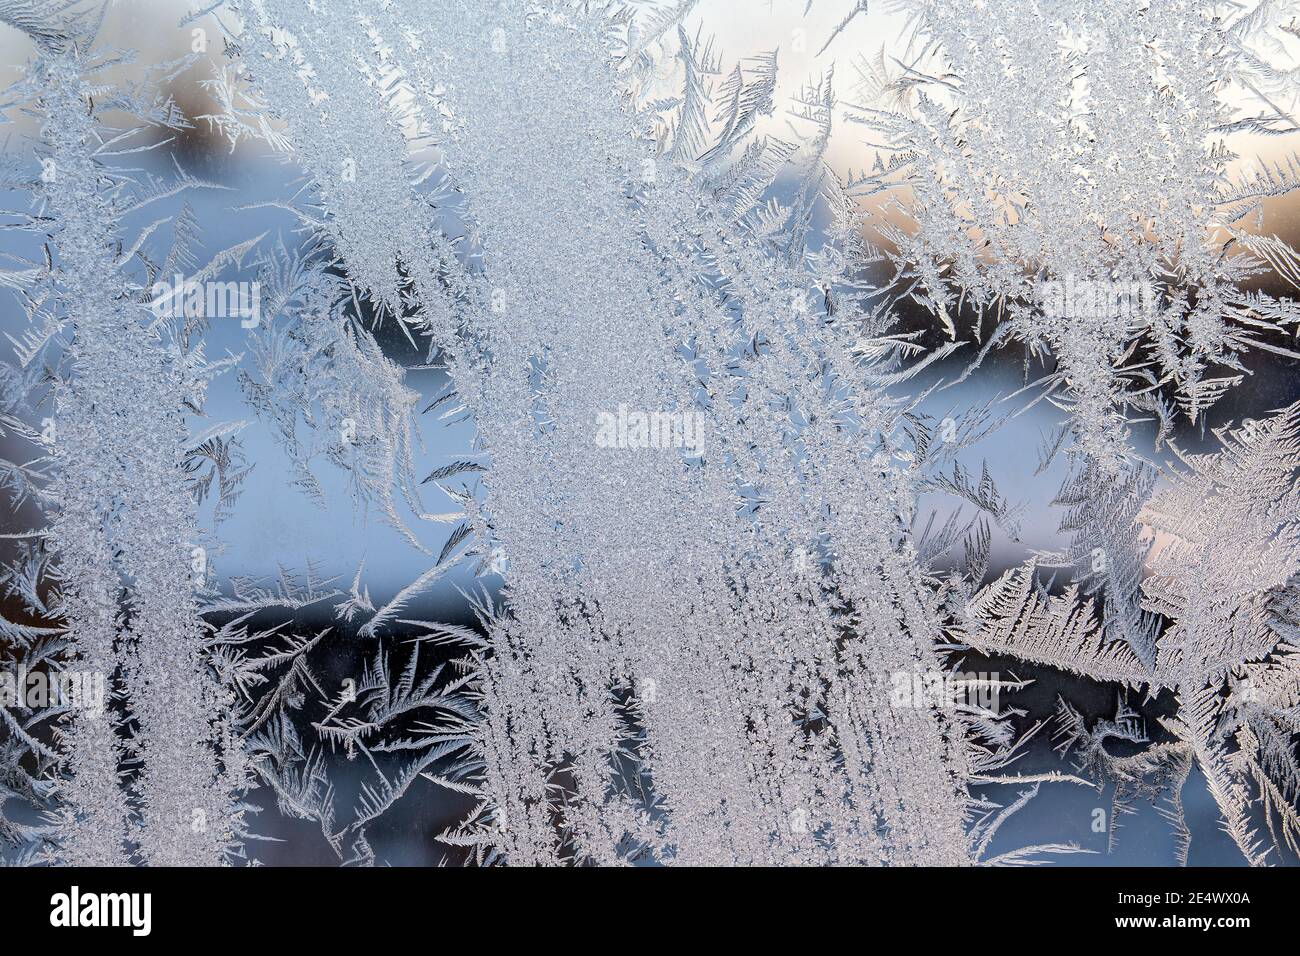 Heating season. Ice flower on a frozen window. Energy efficiency and weather conditions. Stock Photo